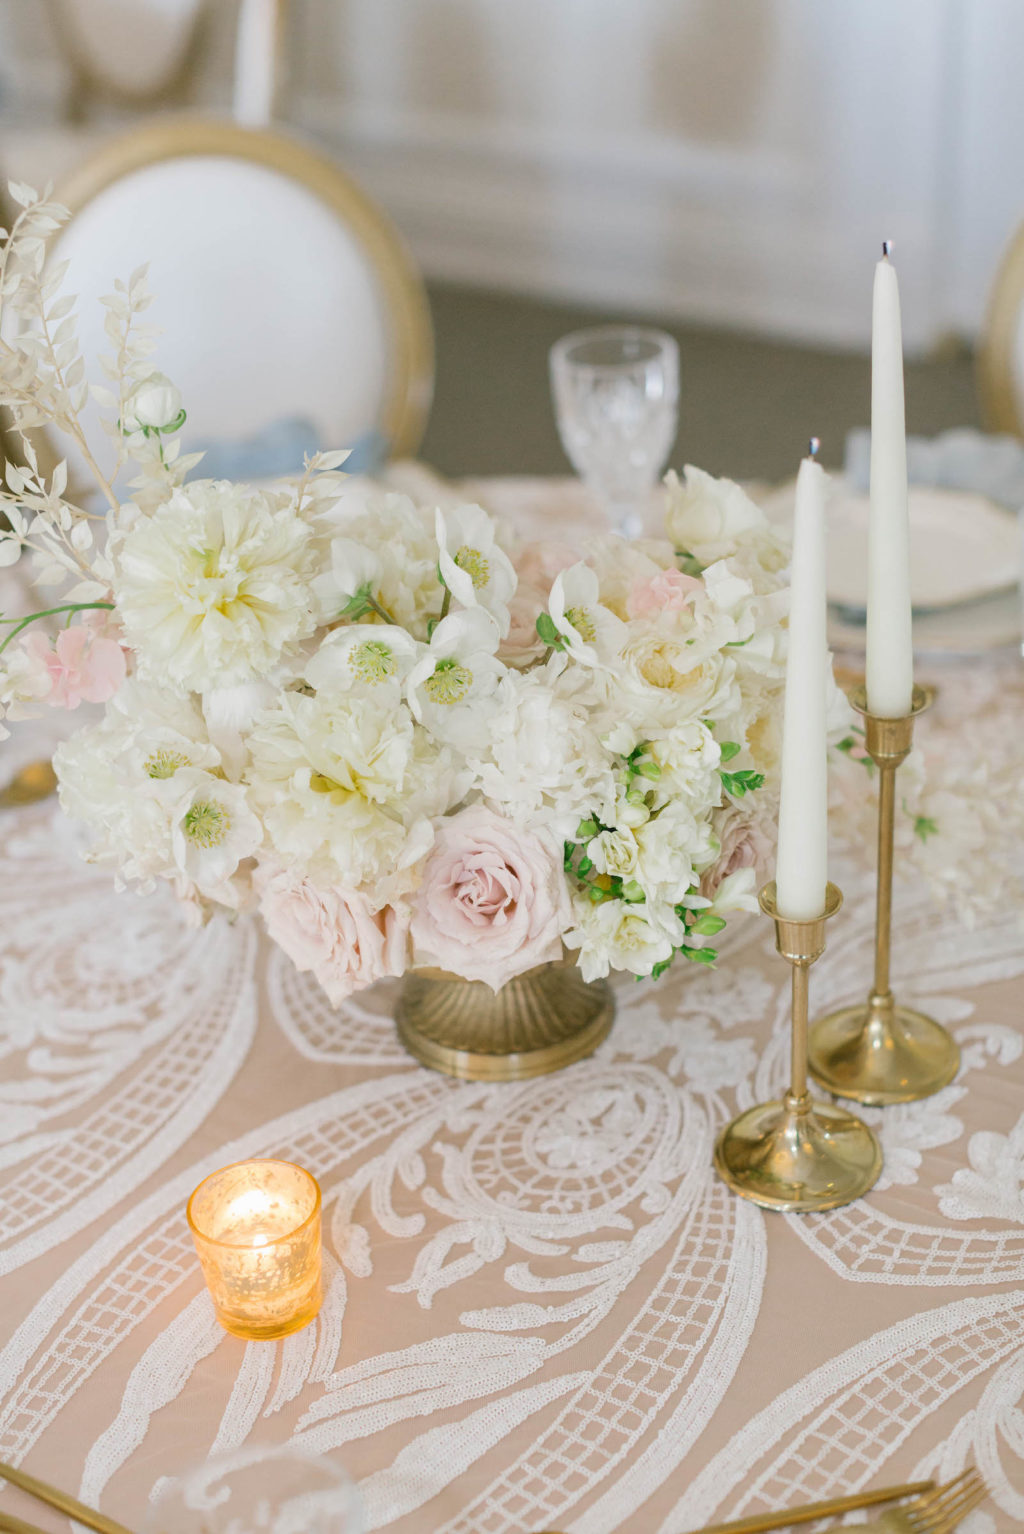 Classic Modern Wedding Reception Decor, Floral Lace Table Linen and Blush Pink Underlay, Gold Candlesticks, Low White Hydrangeas and Blush Roses, Gold Candlesticks | Tampa Bay Wedding Planner Parties A'la Carte | Wedding Rentals Kate Ryan Event Rentals